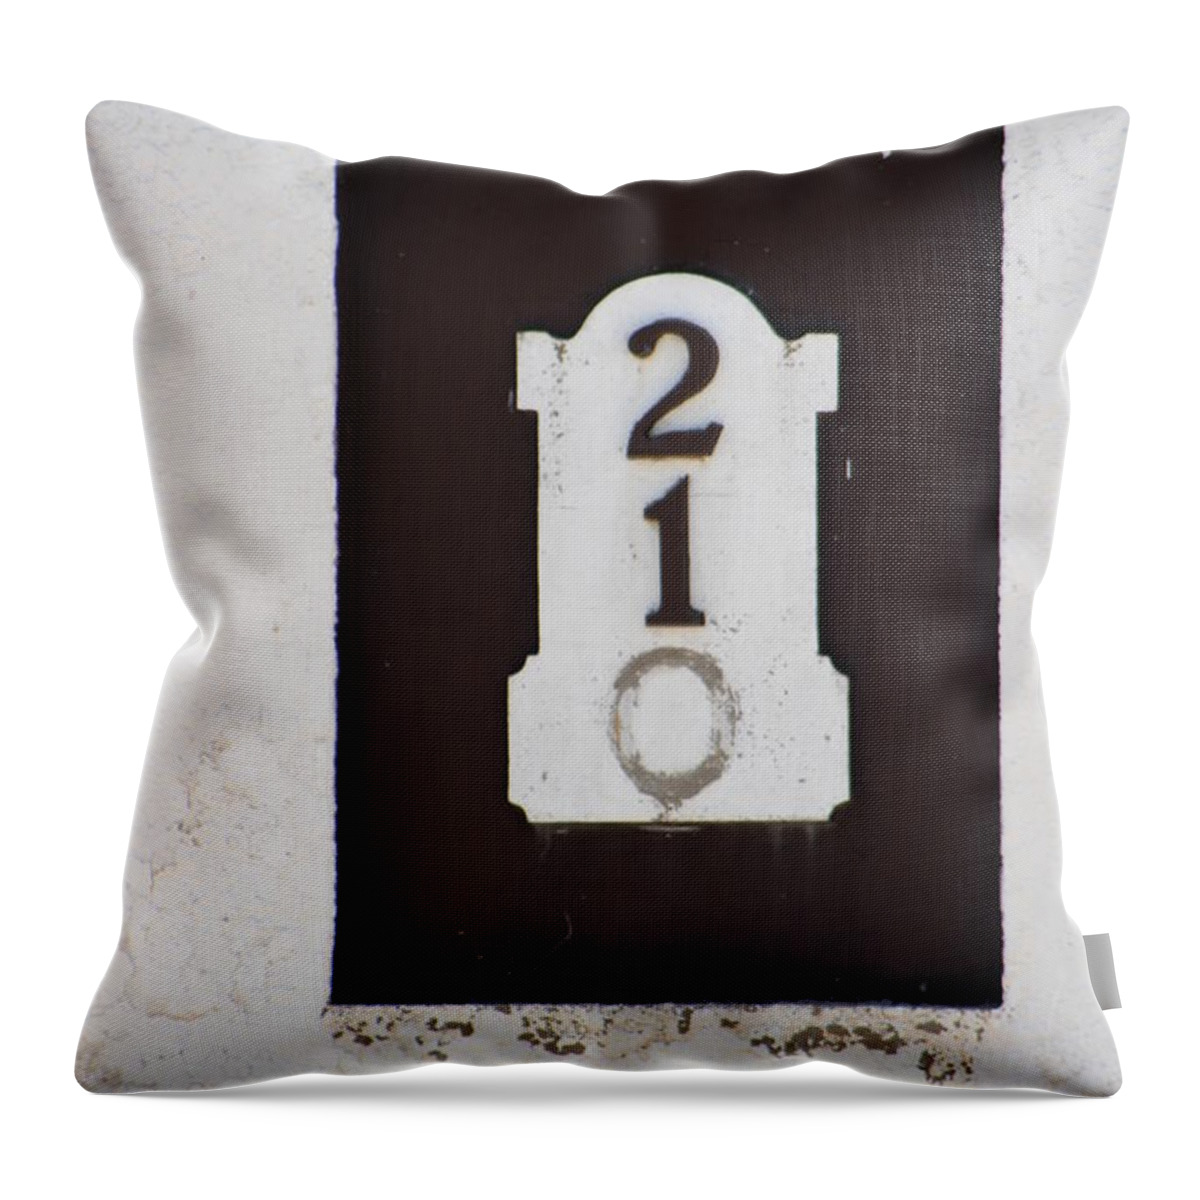 New Mexico Throw Pillow featuring the photograph Building No. 210 by Colleen Cornelius